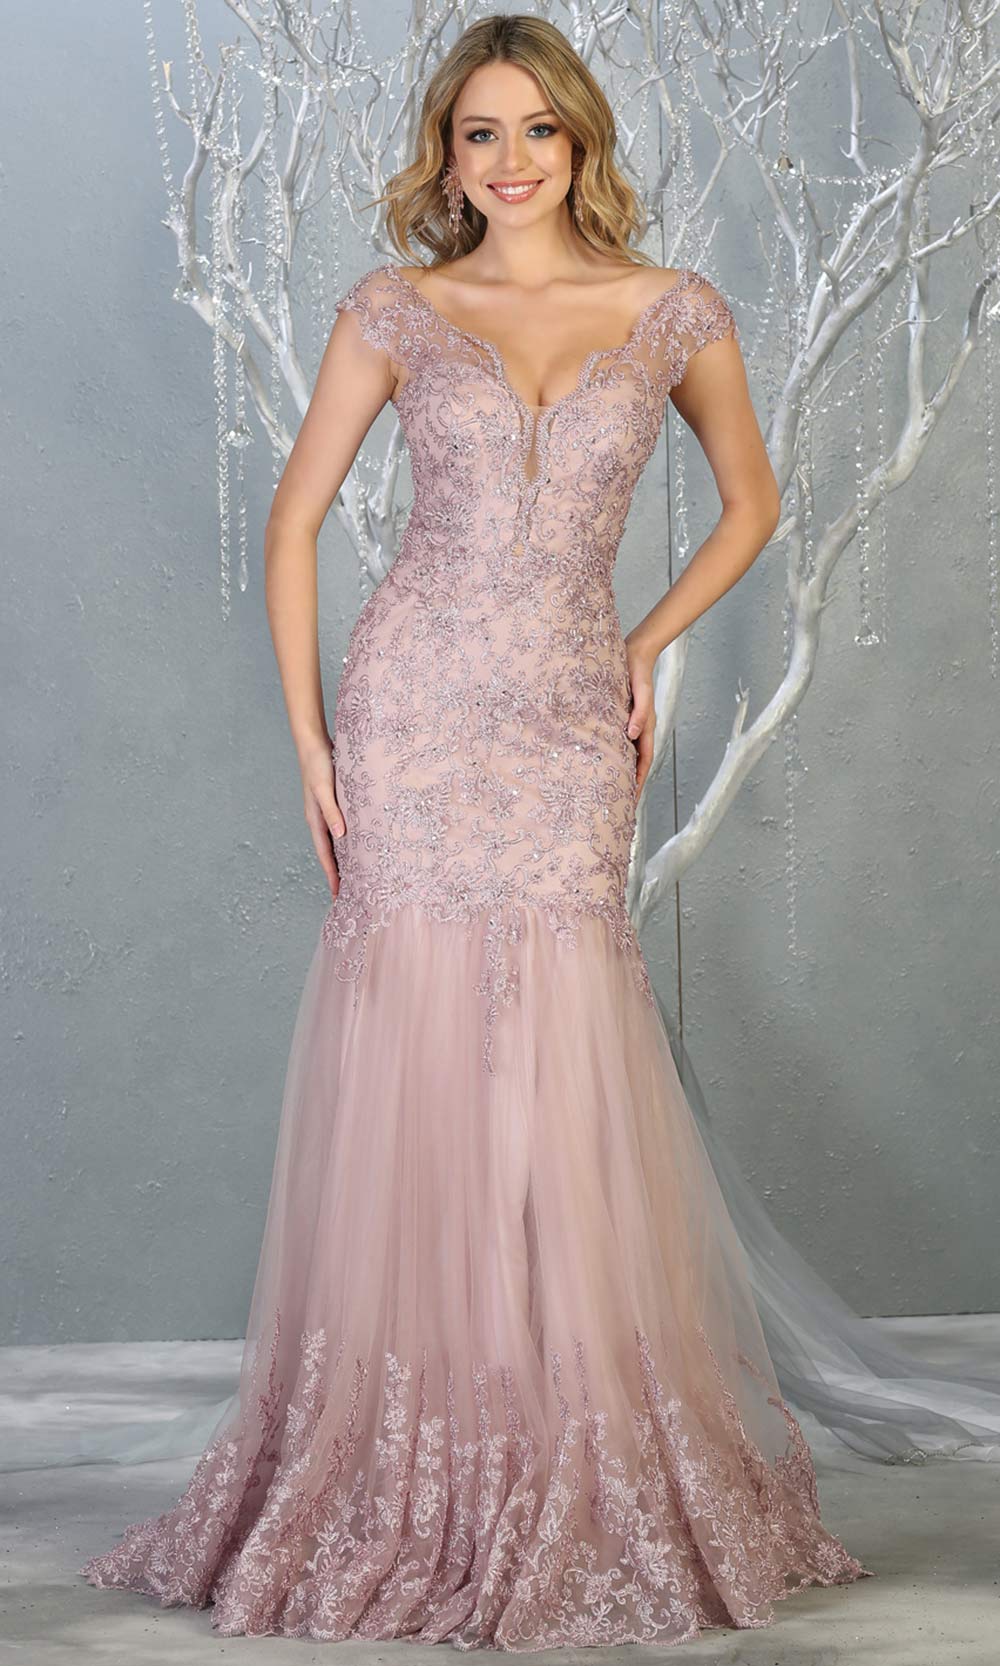 Mayqueen RQ7785 long mauve v neck evening fitted lace mermaid dress w/straps. Full length dusty rose gown is perfect for  enagagement/e-shoot dress, formal wedding guest, indowestern gown, evening party dress, prom, bridesmaid. Plus sizes avail.jpg